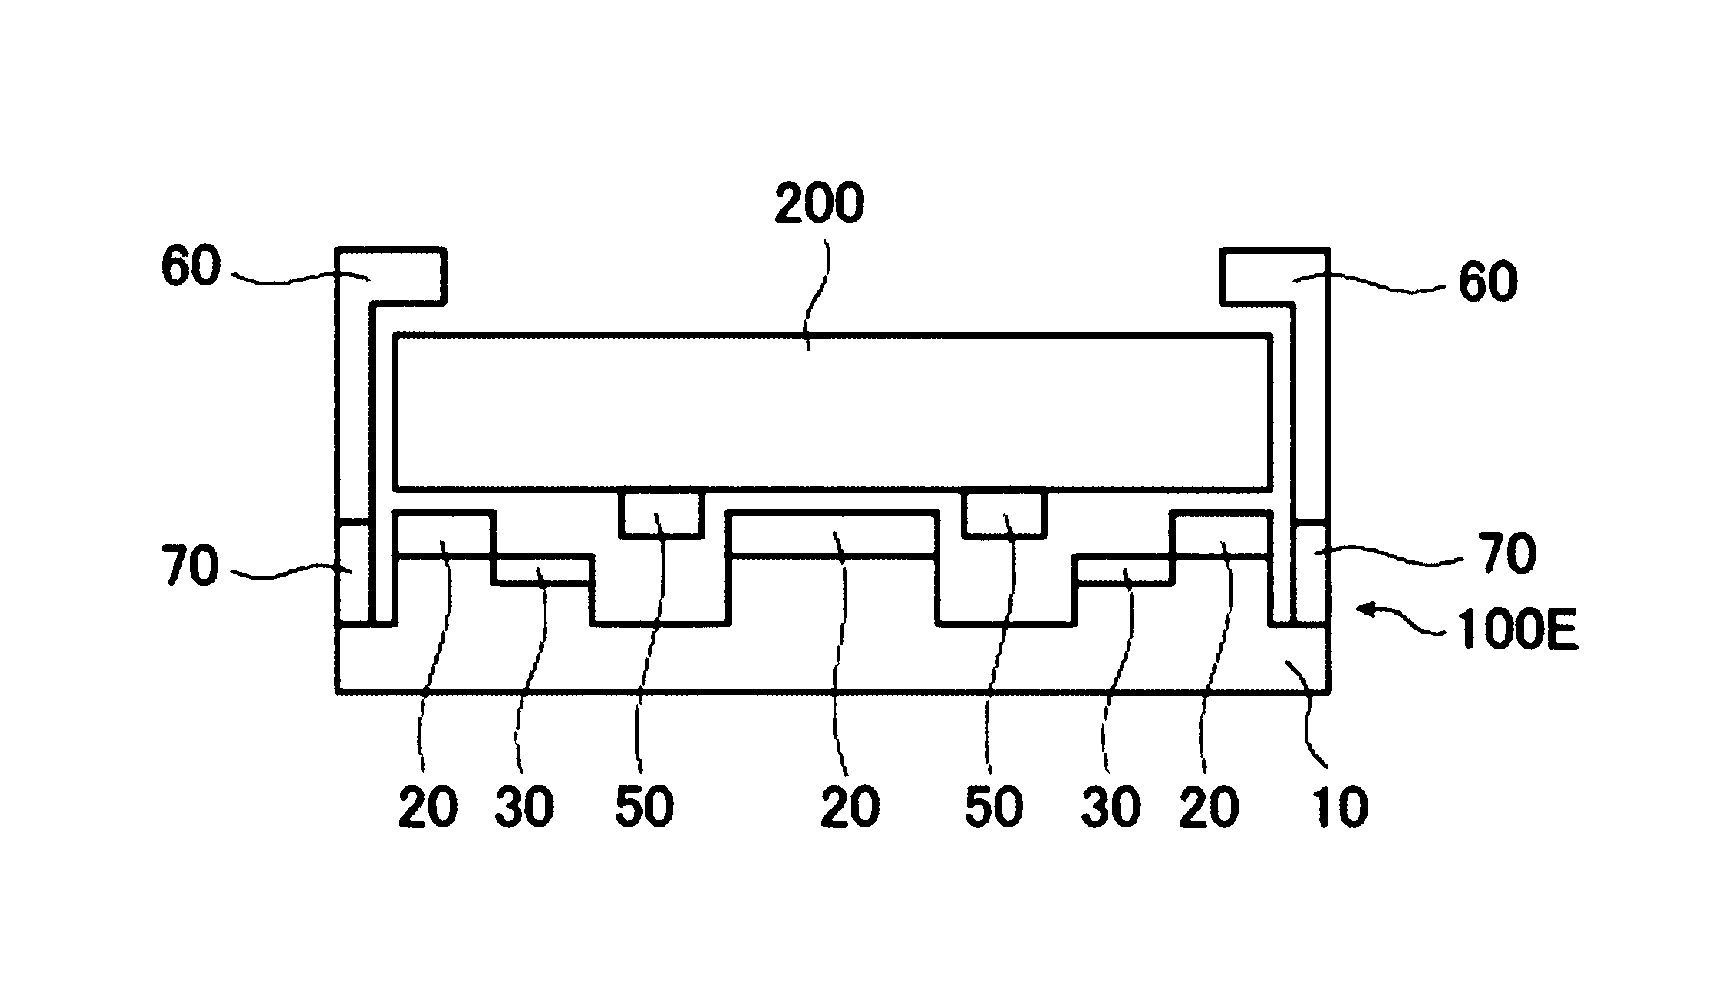 Glass substrate-holding tool